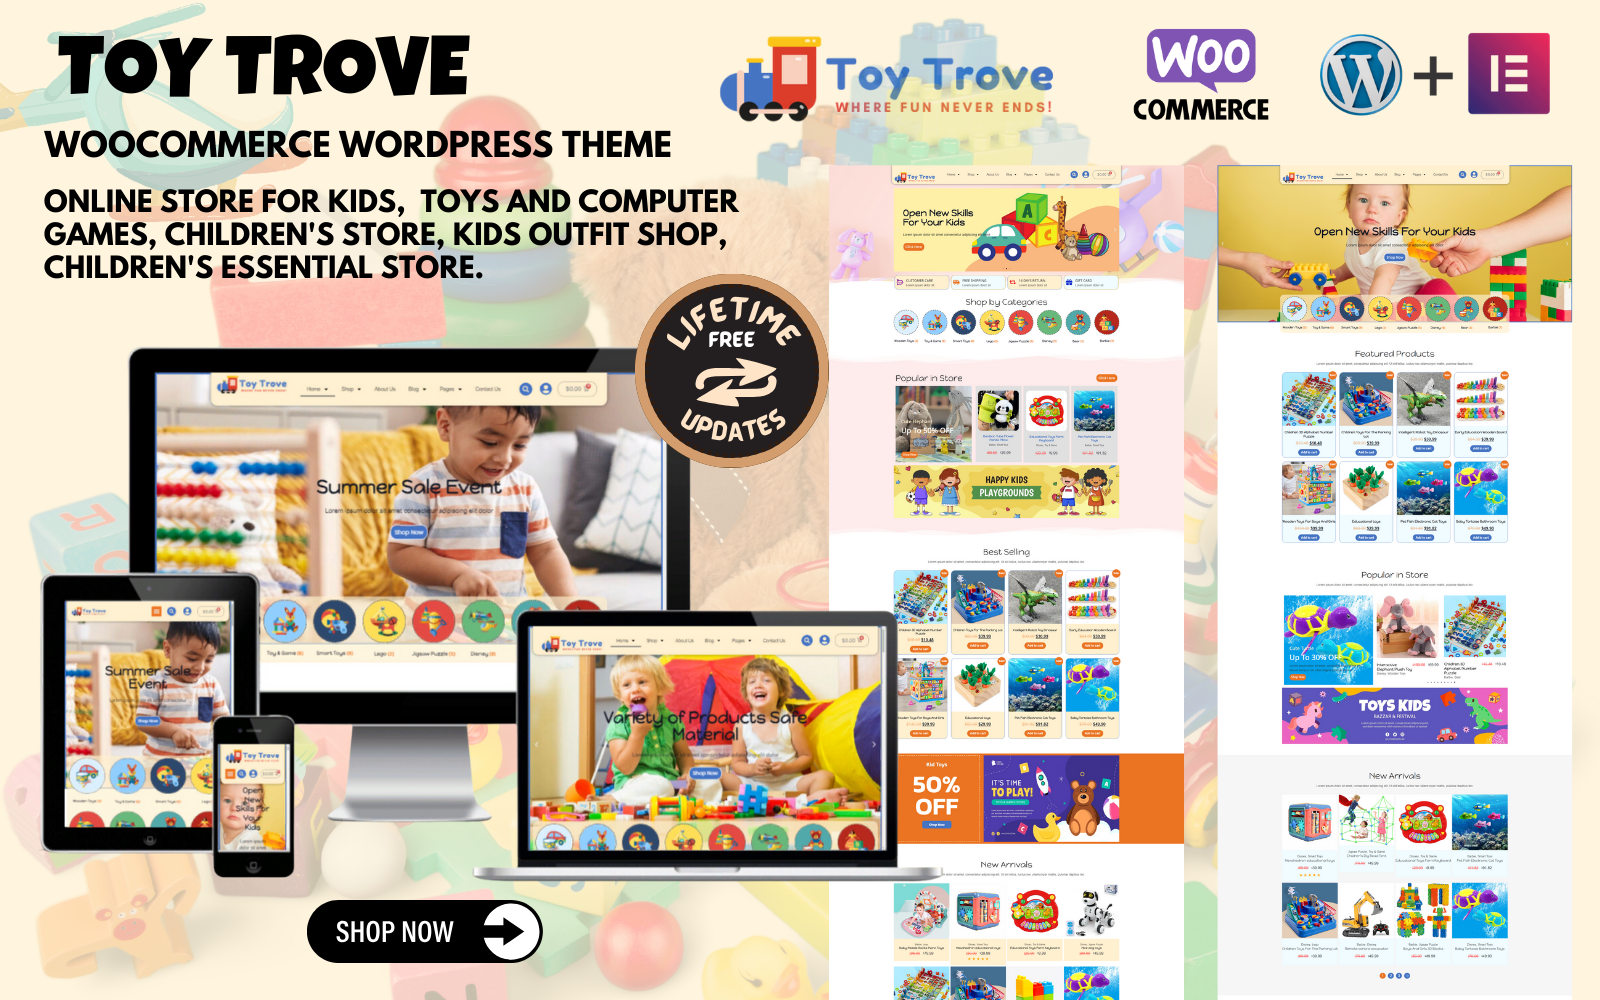 Toy Trove - WooCommerce Elementor WordPress theme for kids' toys, apparel, gift items, and more.